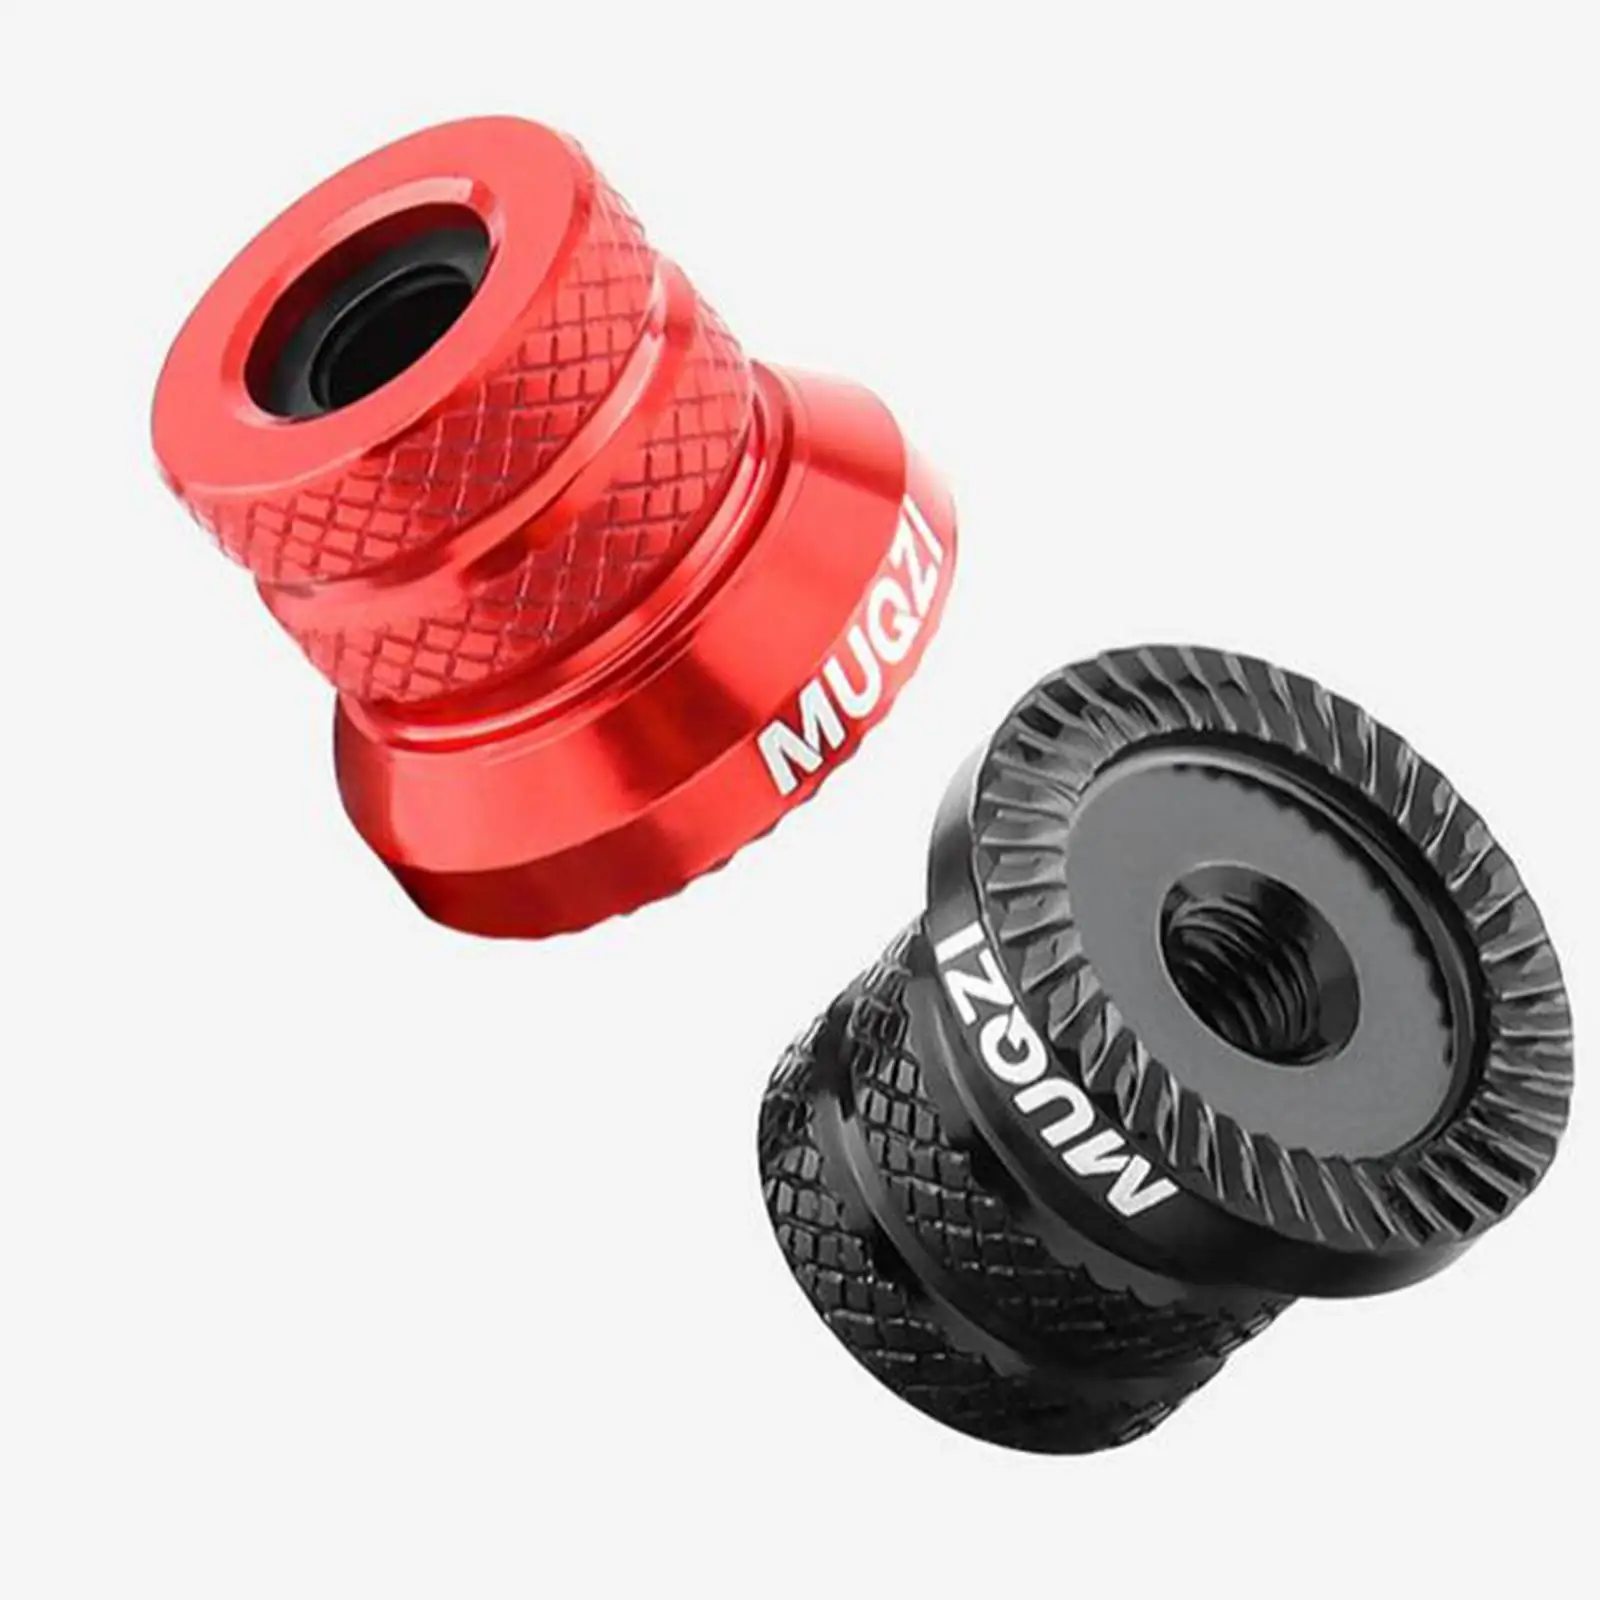 Mountain Bike Quick Release Skewer 100/135mm Wheel Hub Front and Rear Clip Bolt for Mountain Bike Cycling Bearing Hubs Access